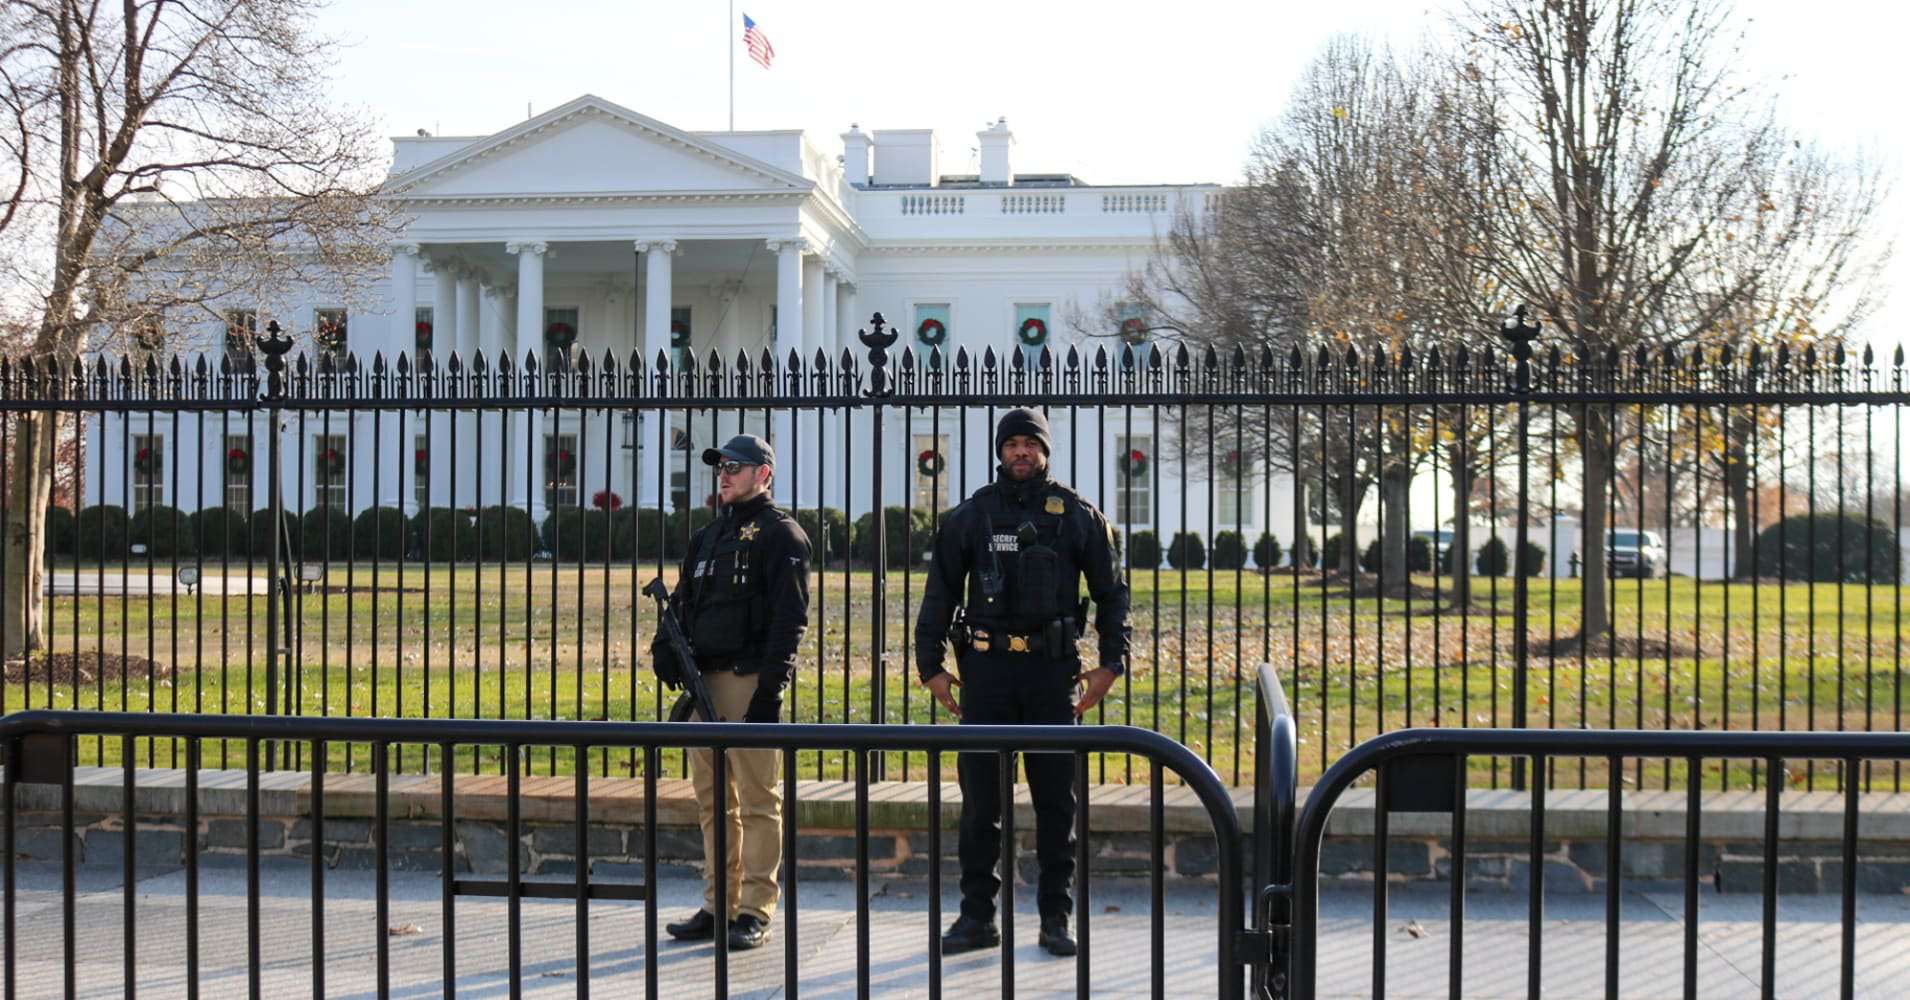 image for White House lifts lockdown after airspace violation was reported